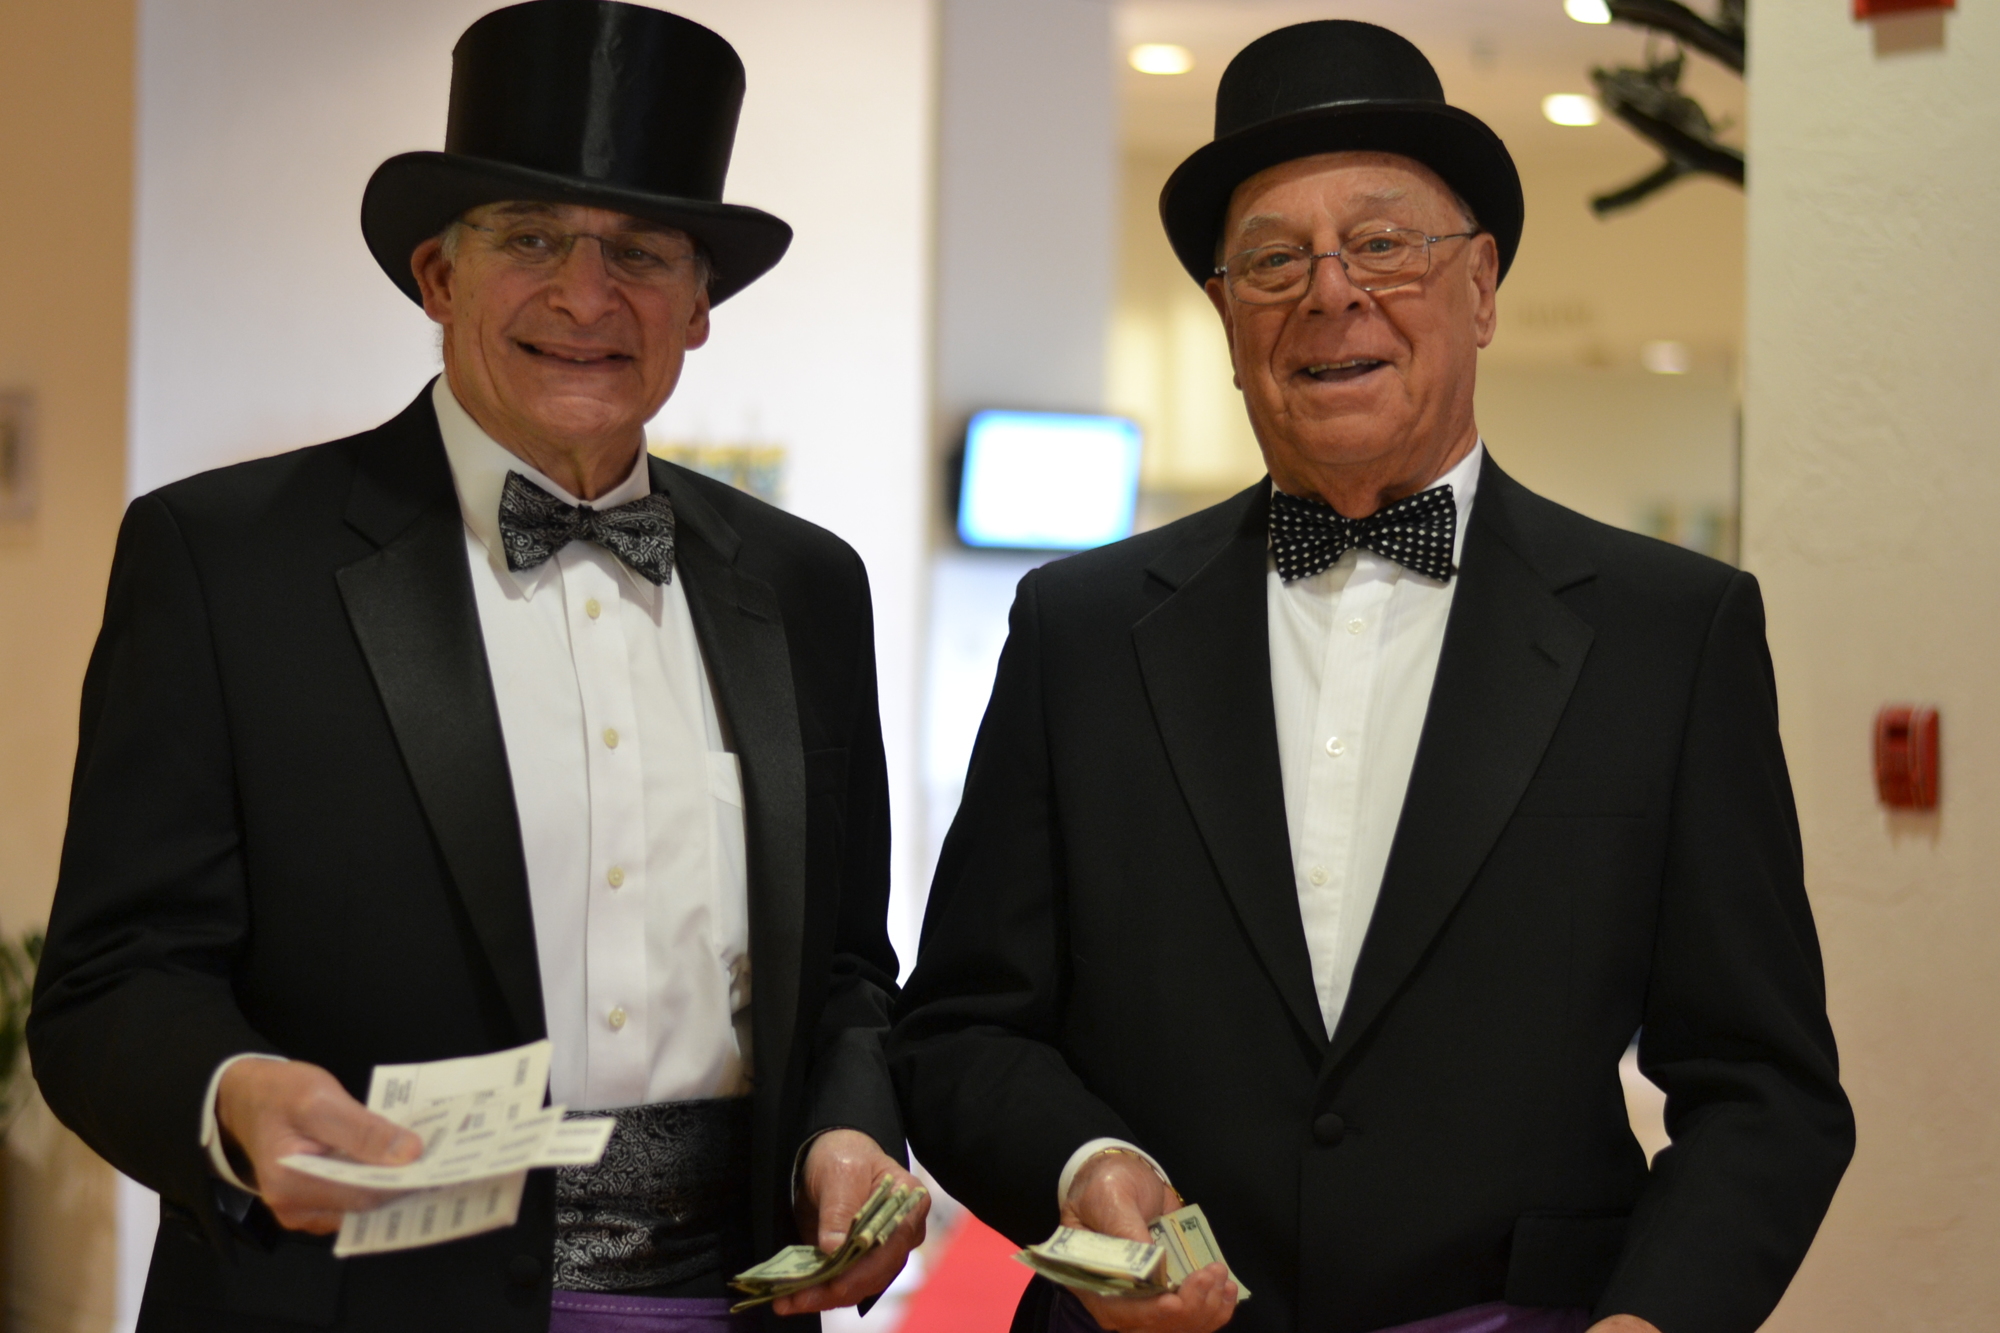 Fred Bloom and Larry Lerner dressed to kill and hustling chances at the Beth Sholom Sisterhood luncheon. Photo by Amanda Morales